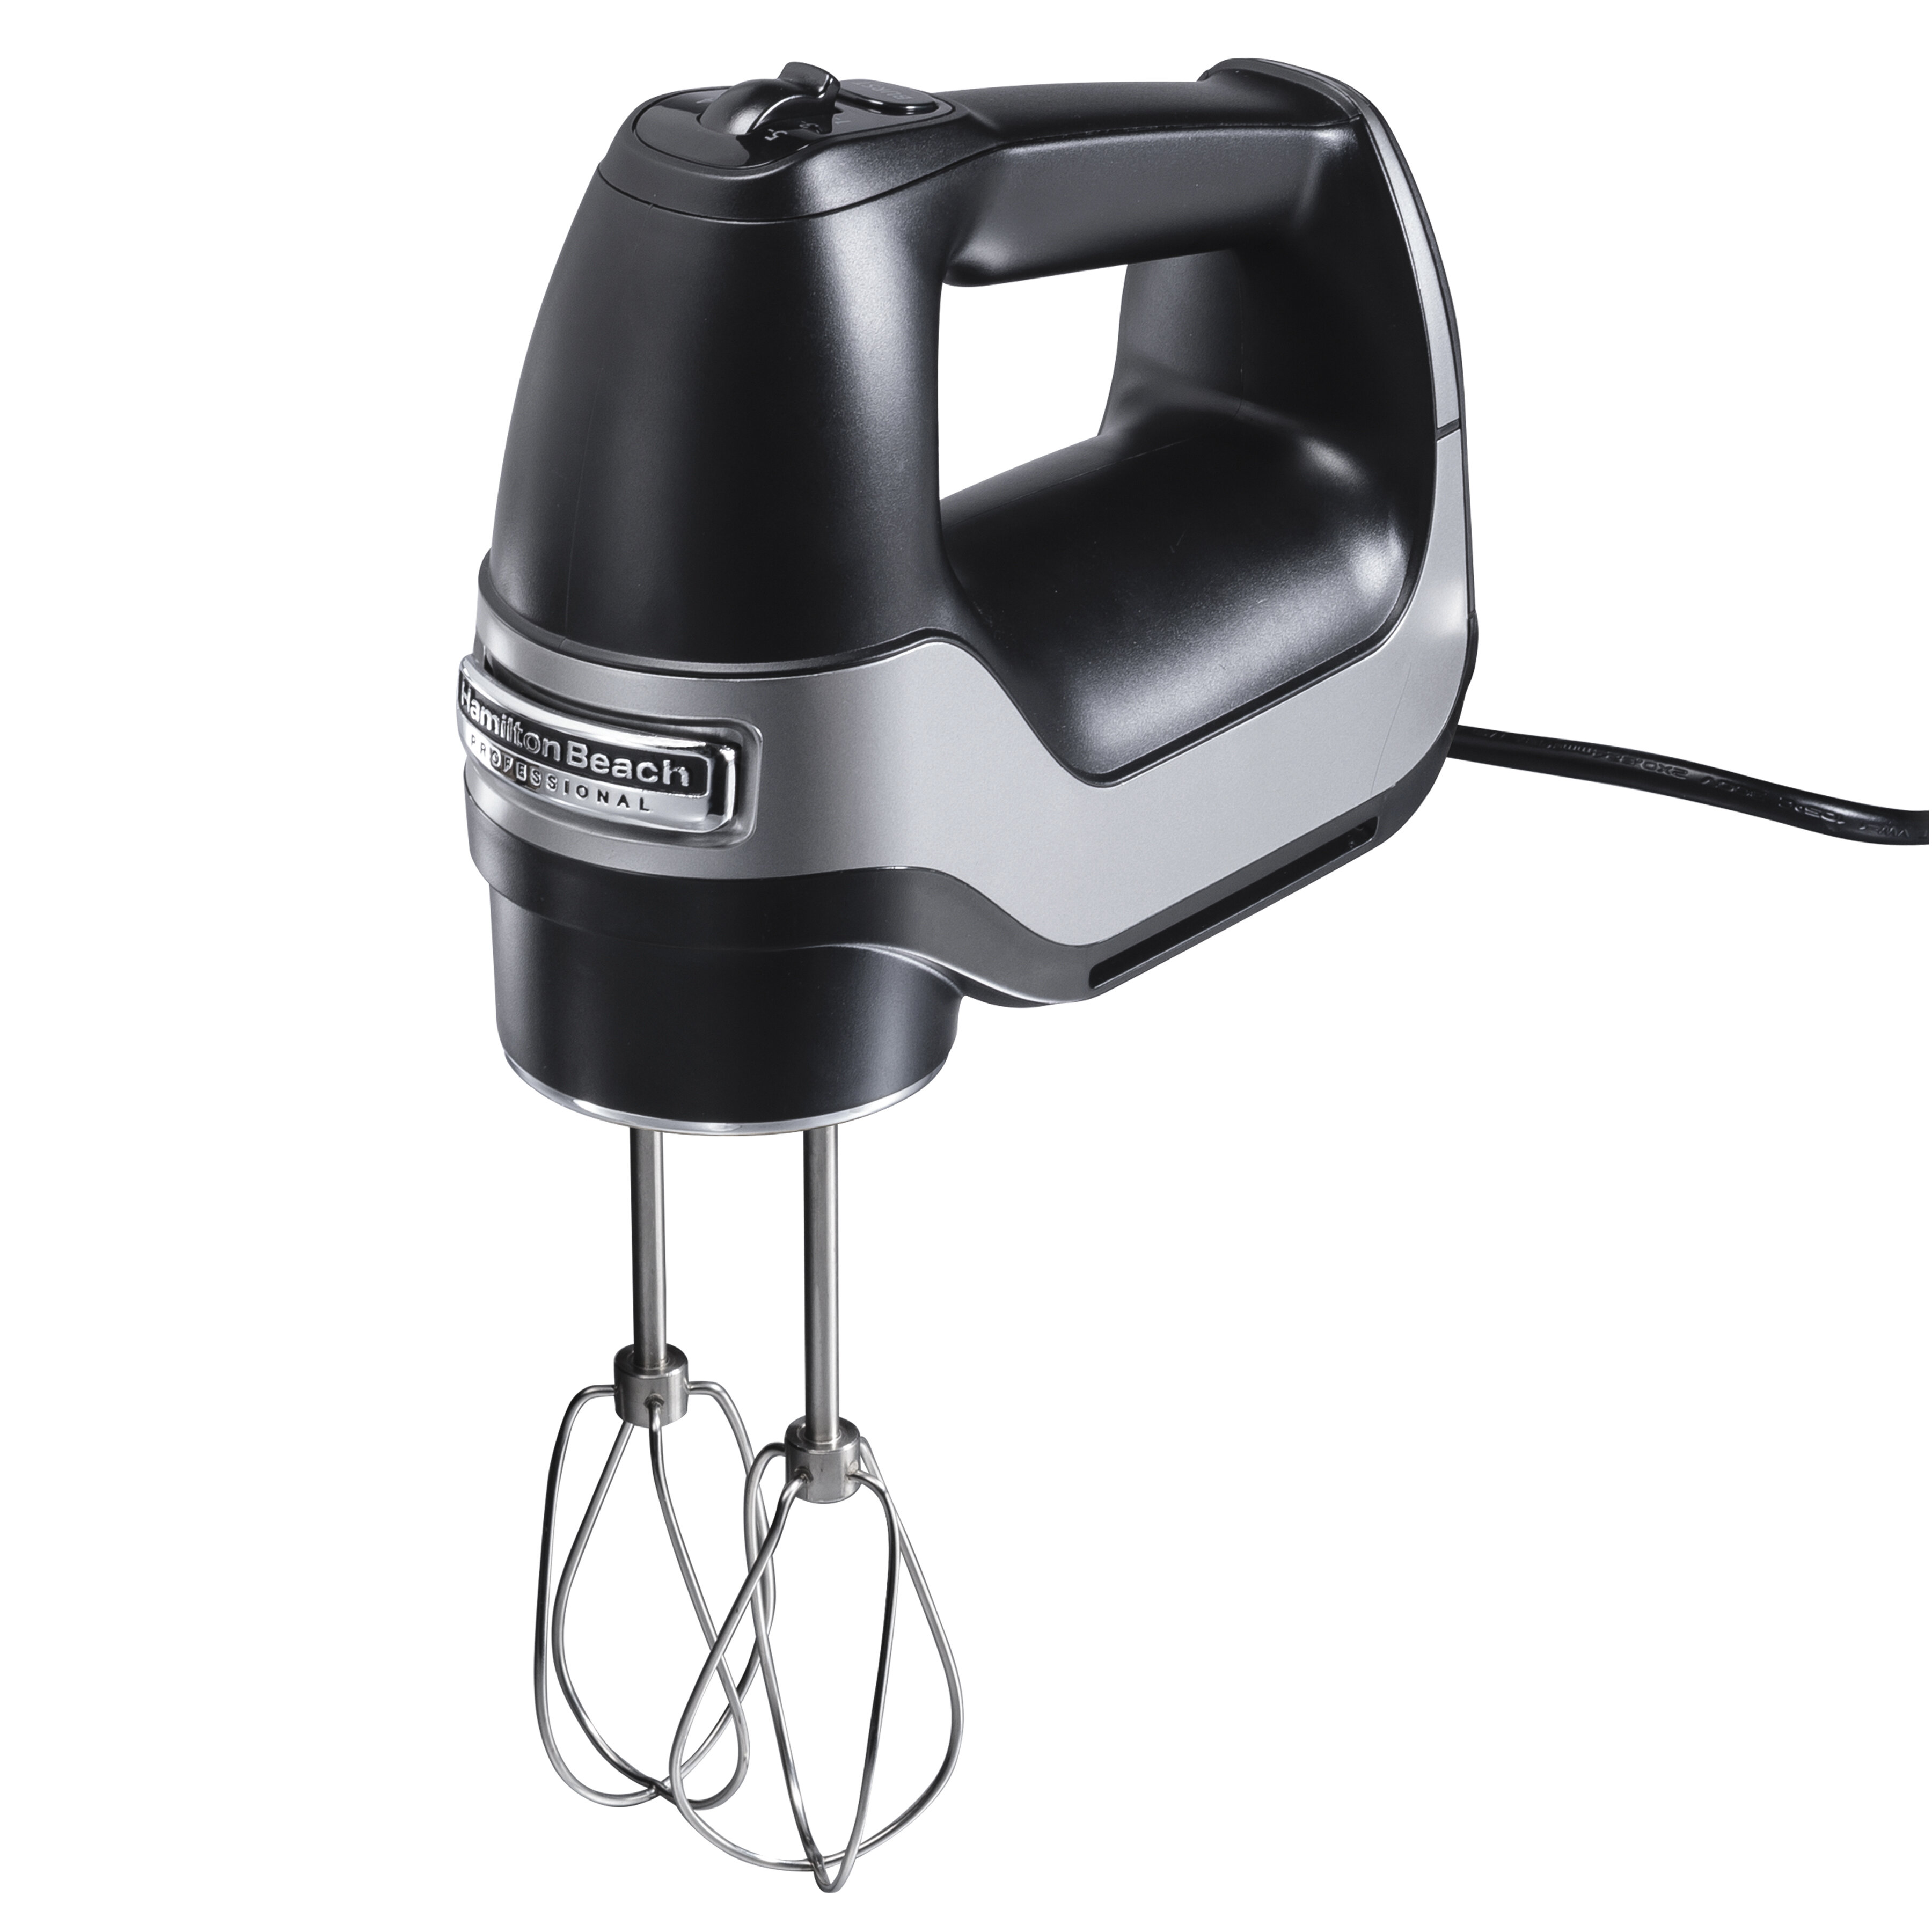 Hamilton Beach White 6 Speed Hand Mixer with Beaters, Whisk, and